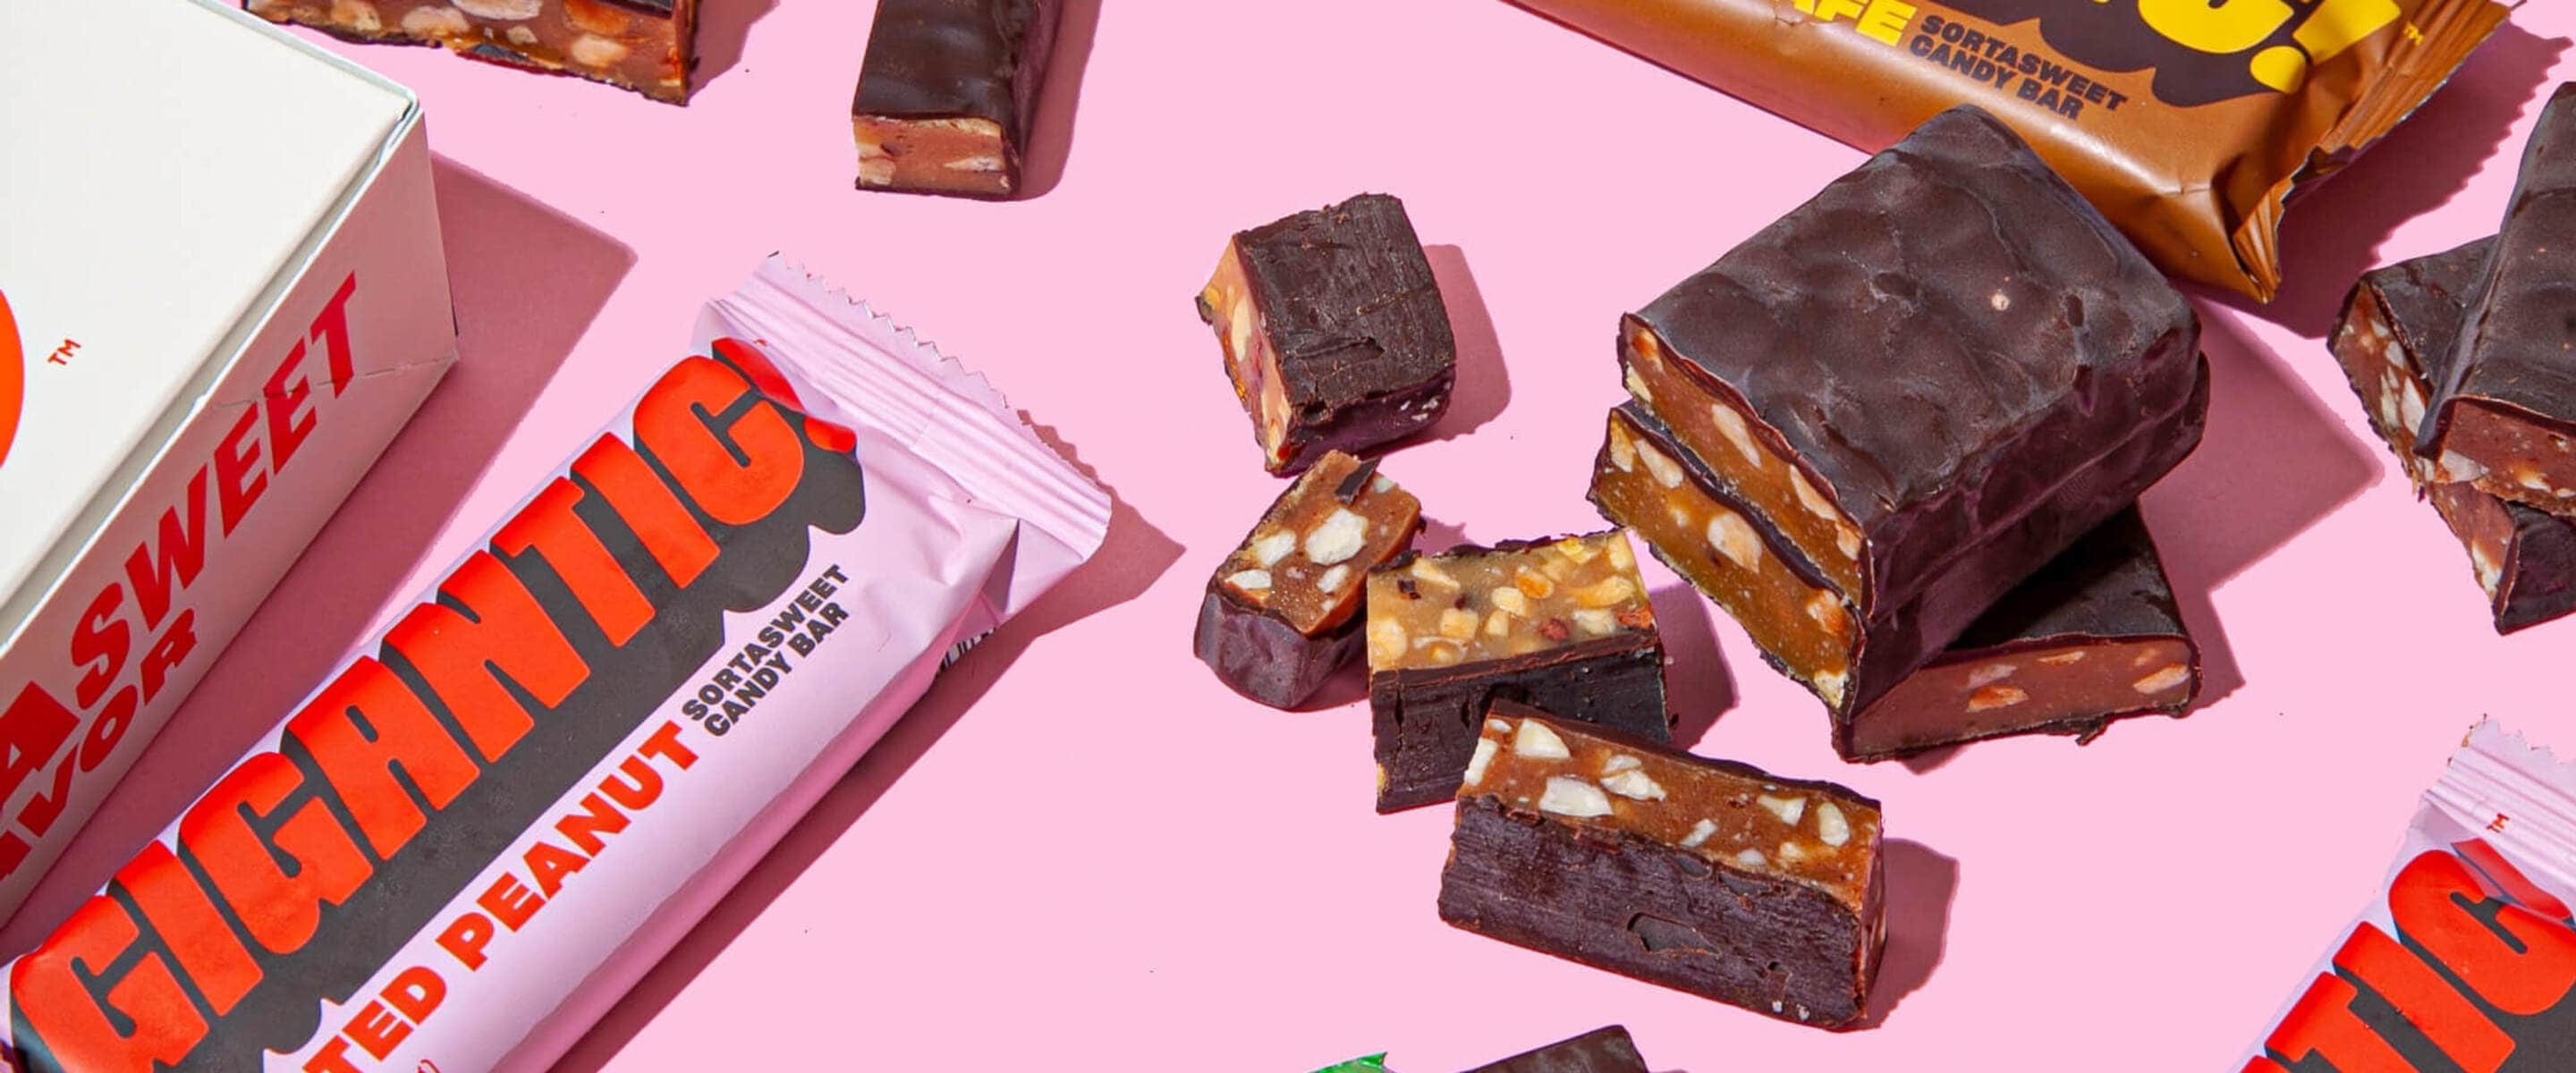 The VegNews Guide to Vegan Candy